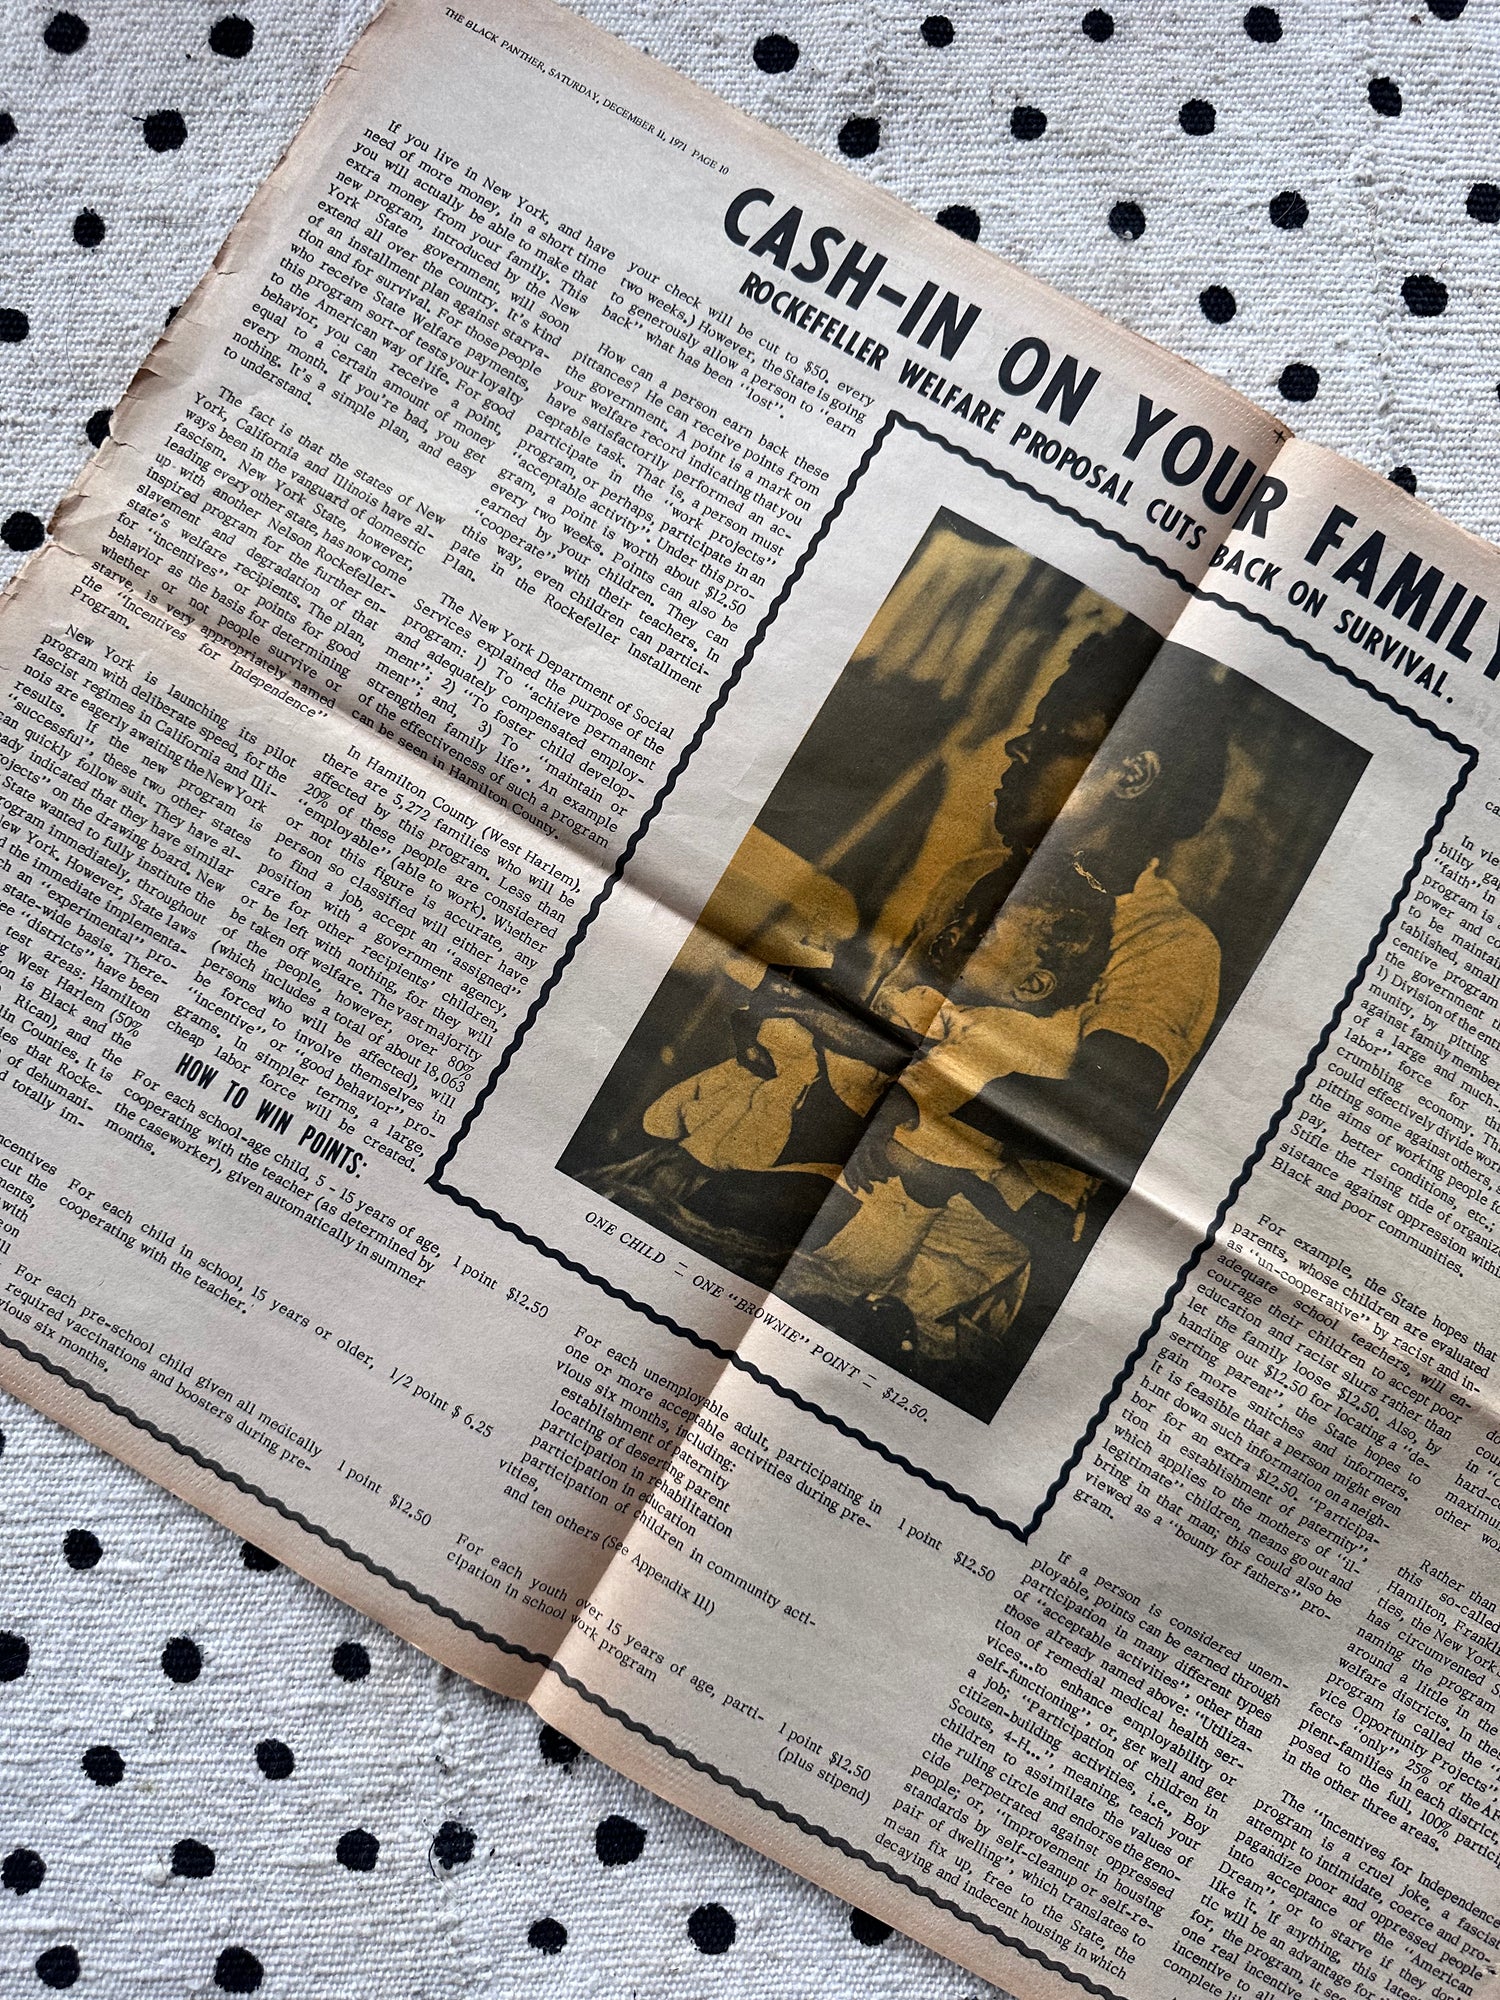 Original Black Panther Party Newspaper -- Cash In On Your Family (1971)